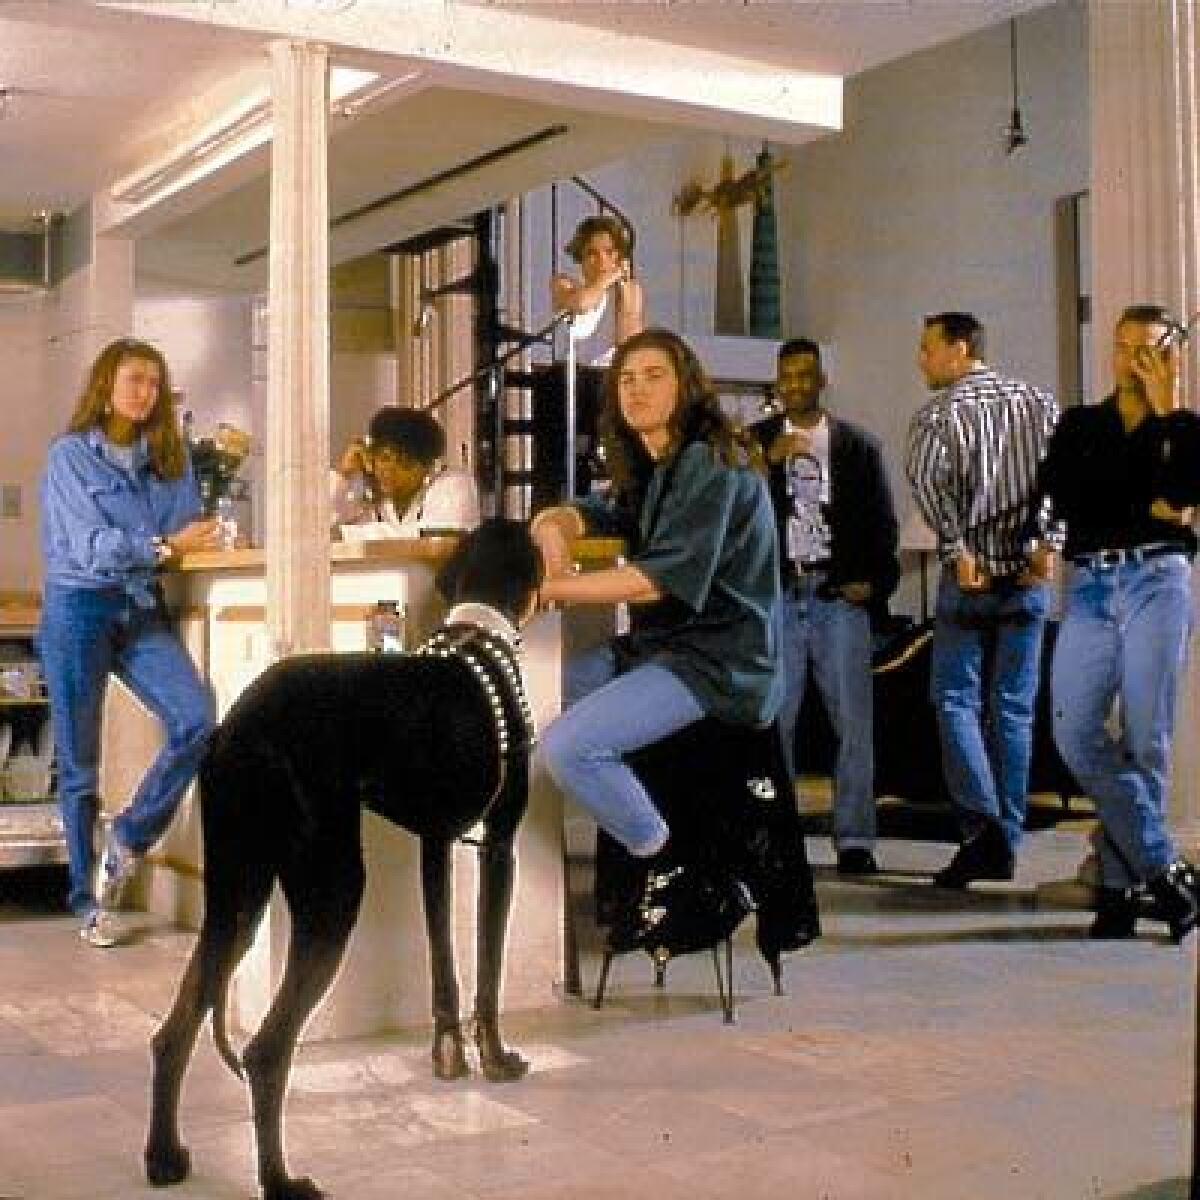 The cast of "The Real World" pictured in their loft in 1992